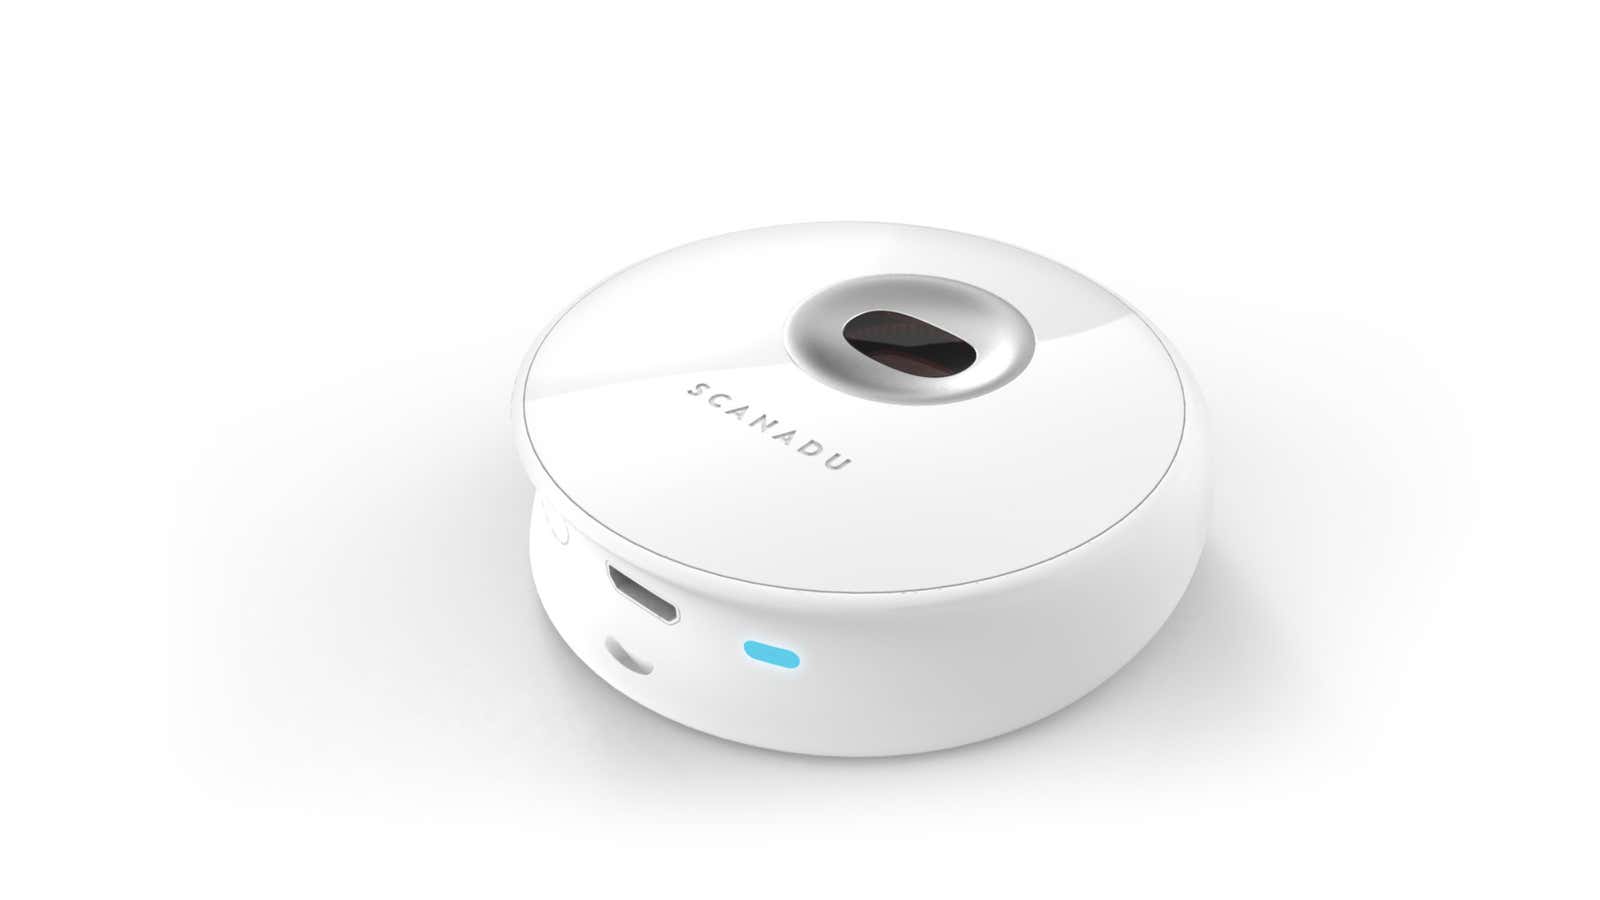 The Scanadu Scout can measure your blood pressure, heart rate and temperature just by touching your forehead.